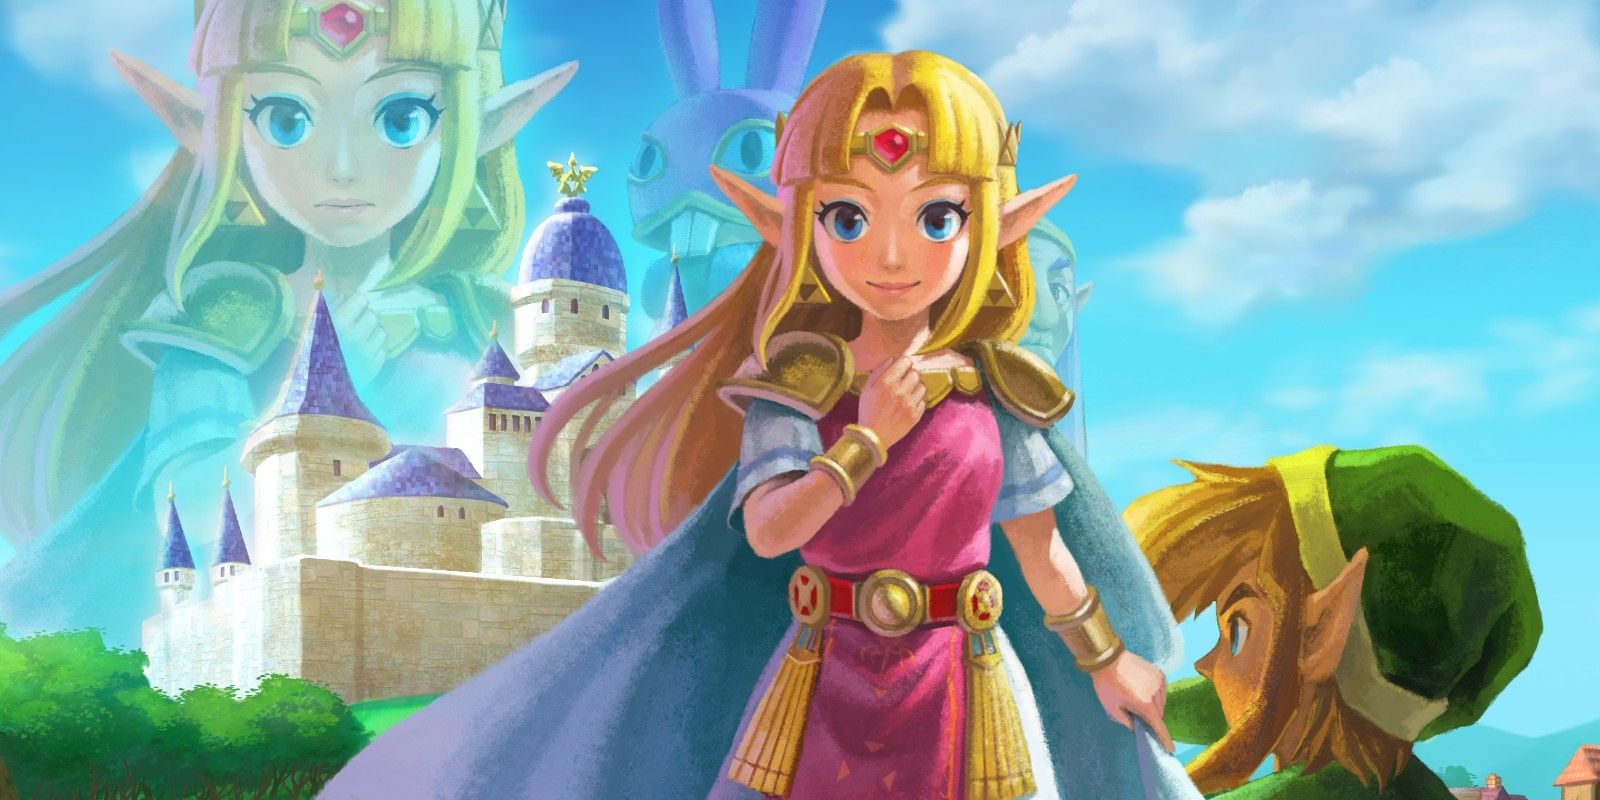 Key art of Princess Zelda from The Legend Of Zelda: A Link Between Worlds, on a background of concept art for the game.